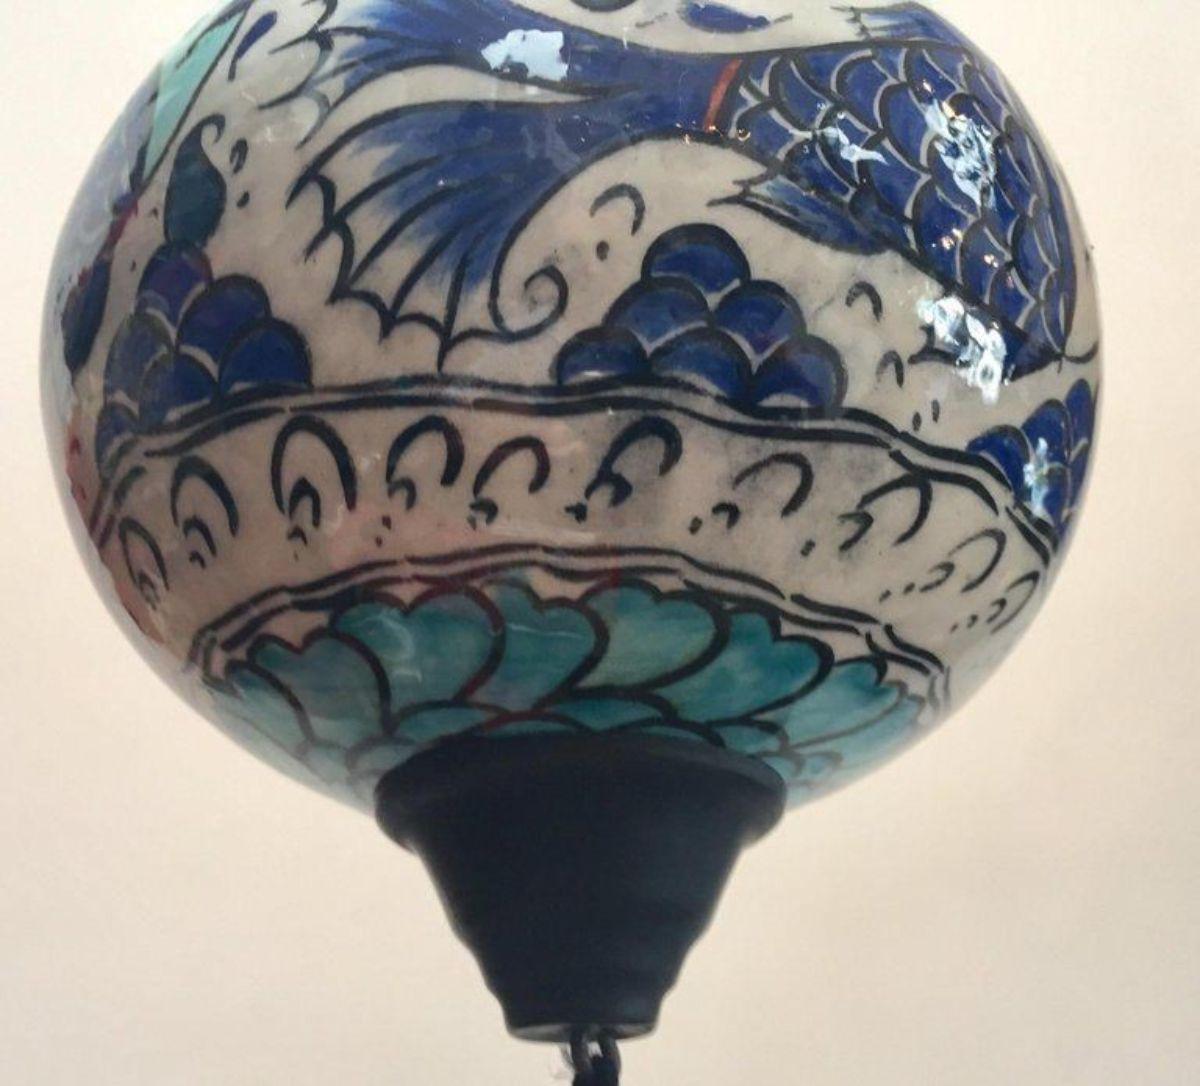 Kütahya pottery hanging ornaments in a bulbous form decorated with fishes underglaze in cobalt blue, turquoise and red on white background.
Cobalt blue silk tassel, hang from a black painted chain.
A Kütahya pottery hanging ornament in polychrome